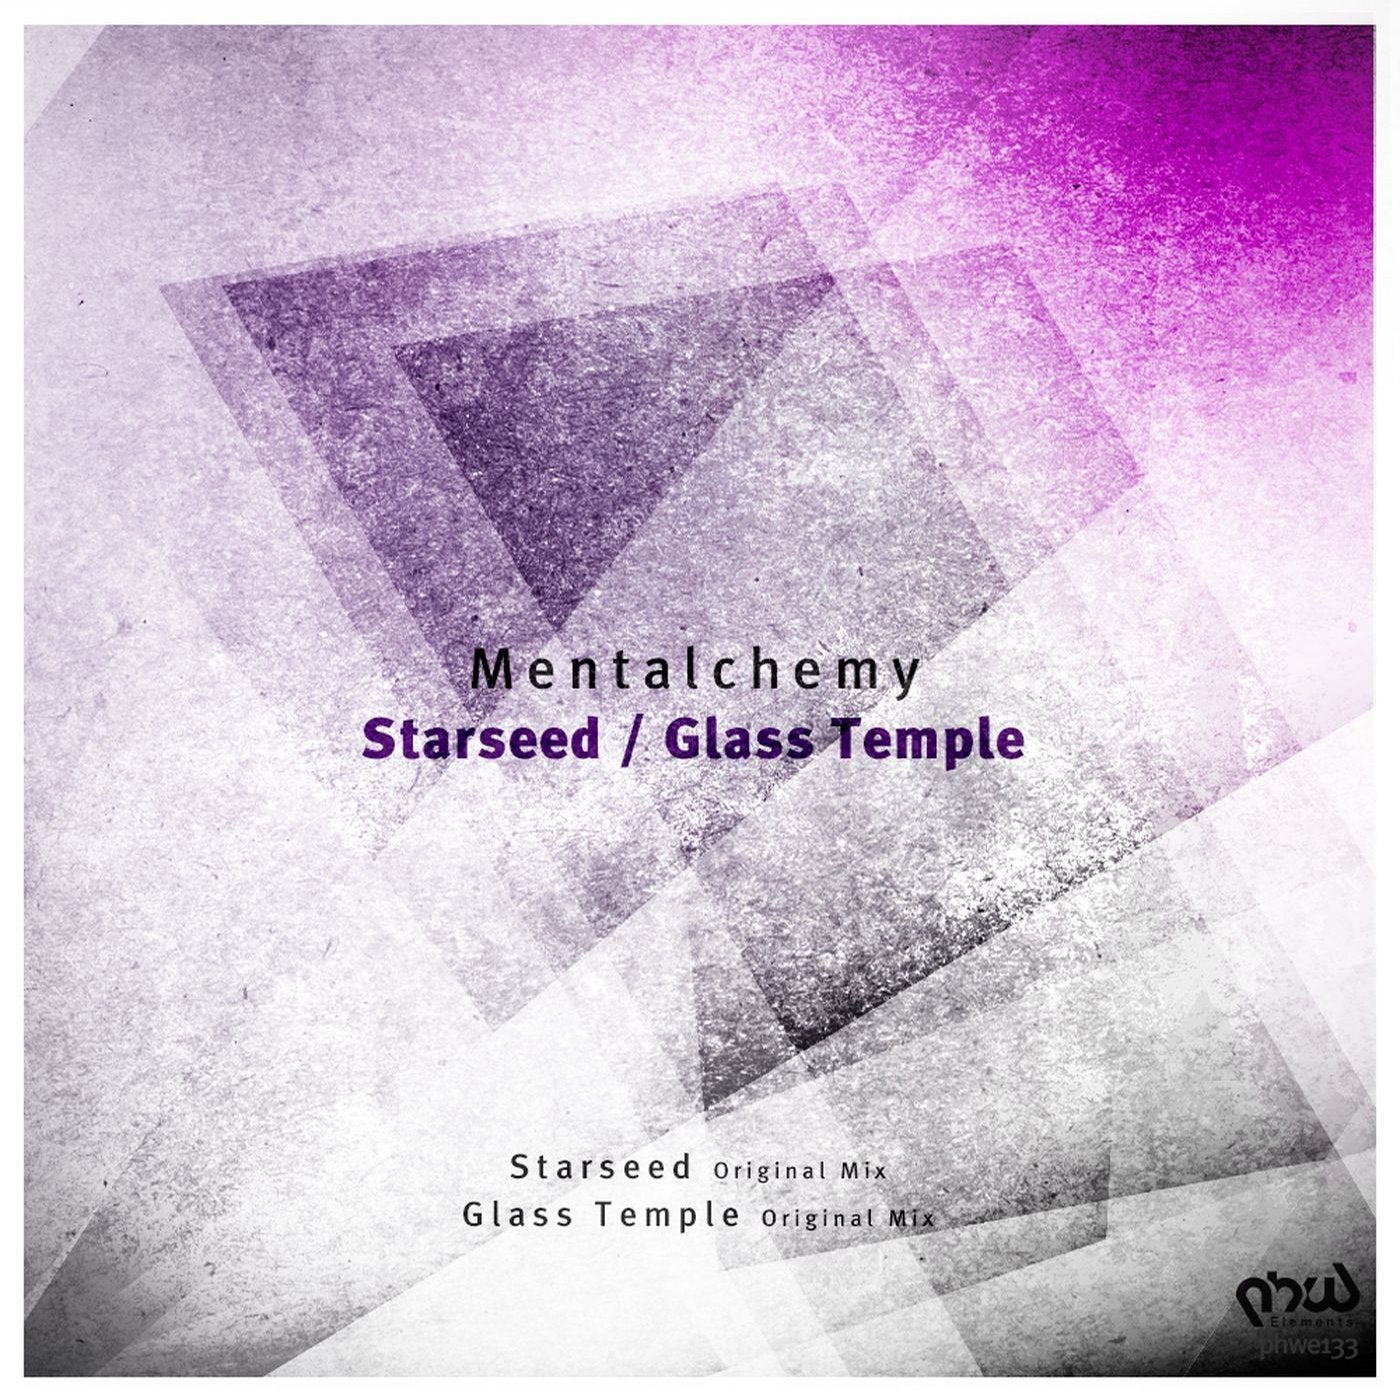 Starseed / Glass Temple